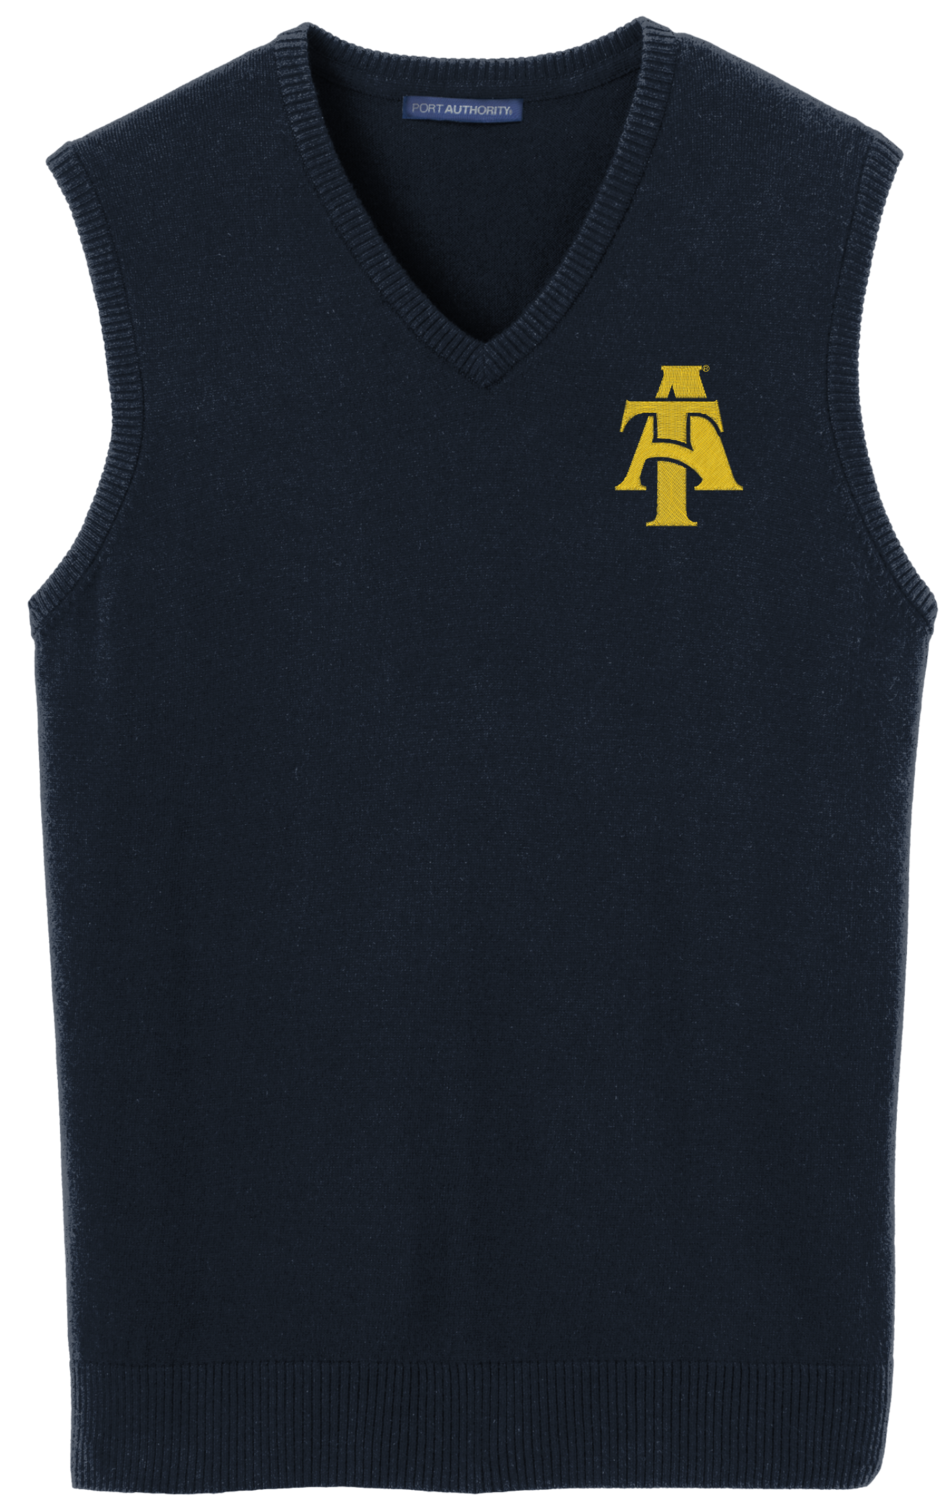 A&T Embroidered Vest